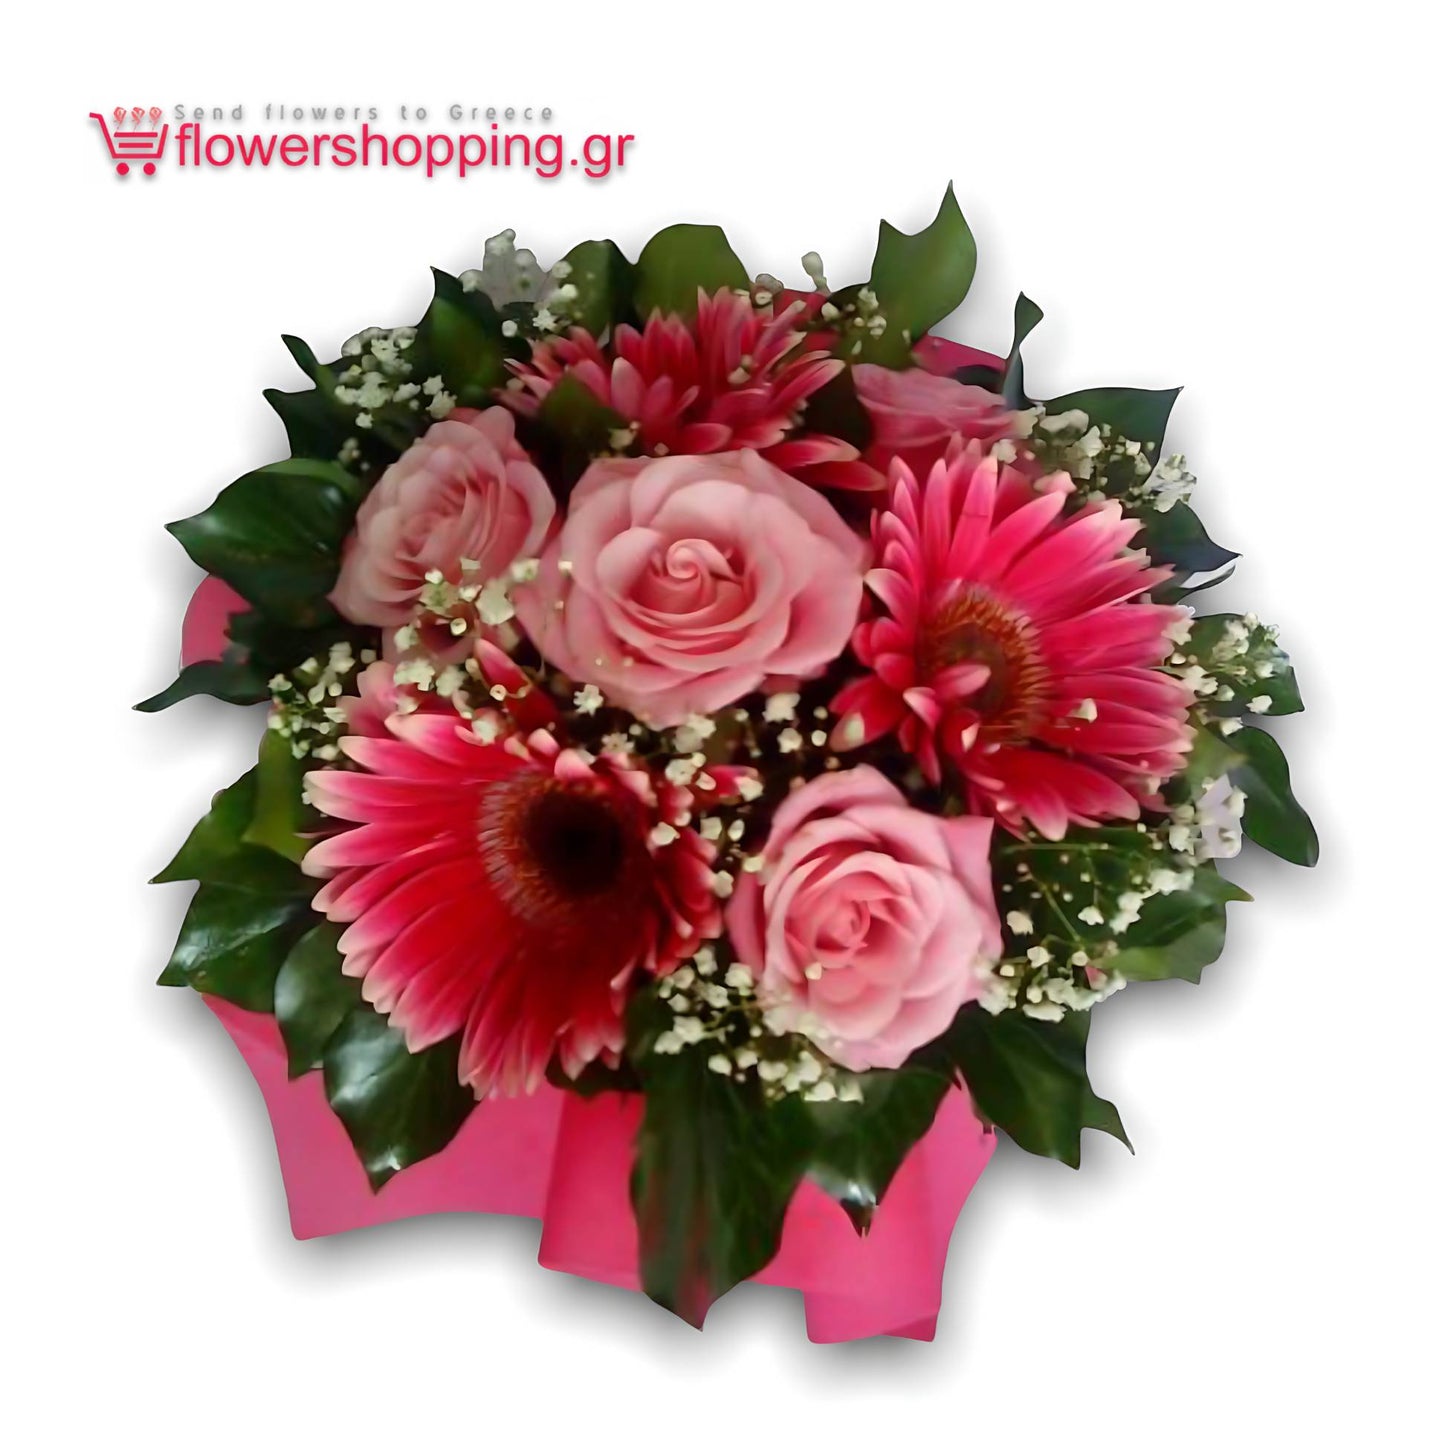 Chic and stylish floral arrangement with pink roses and gerberas, accented with lush greens, perfect for birthdays or special occasions. Available for same-day delivery in Athens